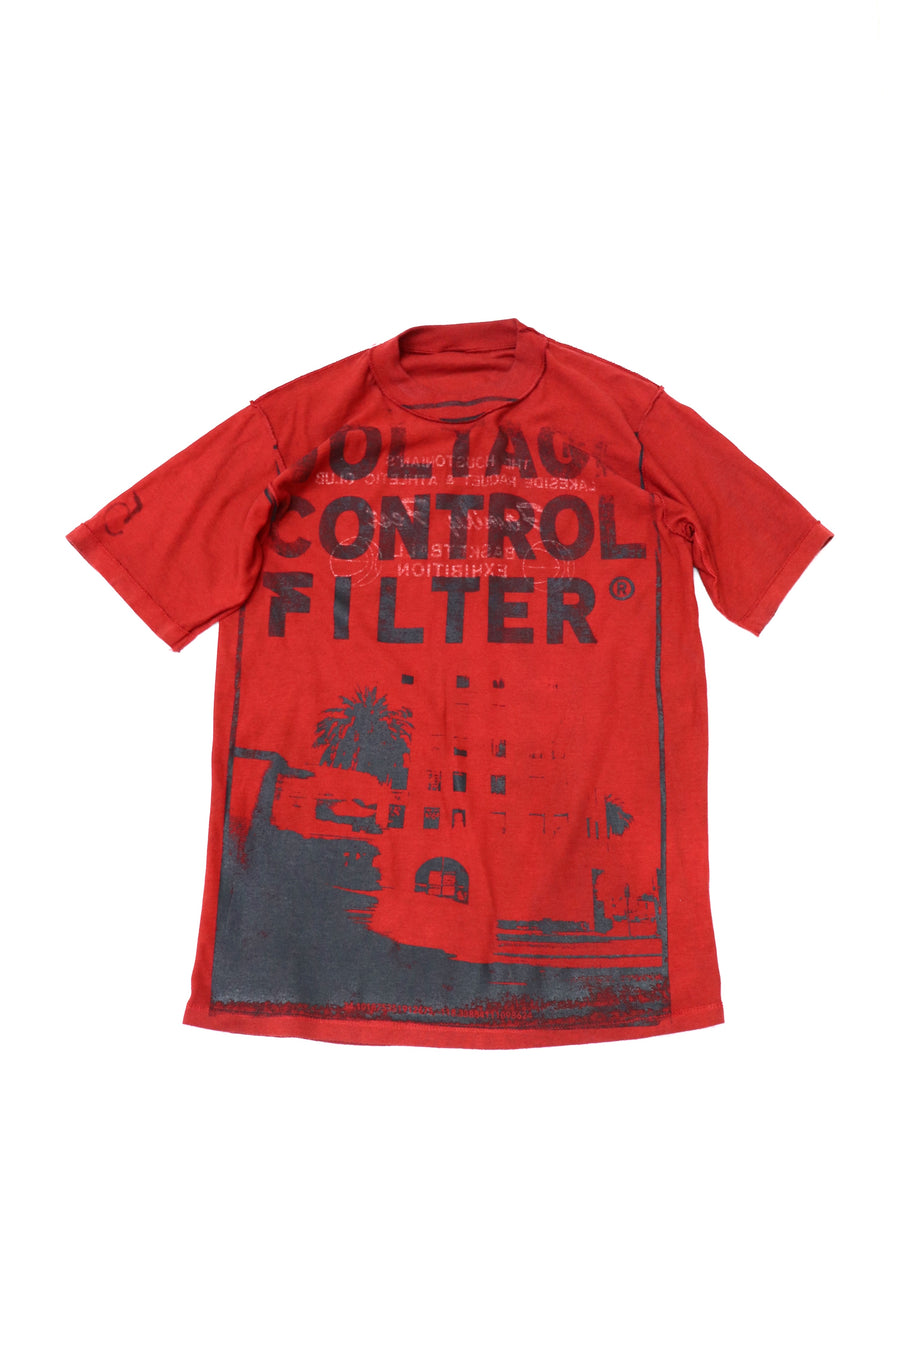 Voltage Control Filter × P.A.A  ONE&ONLY USED PRINT T-5